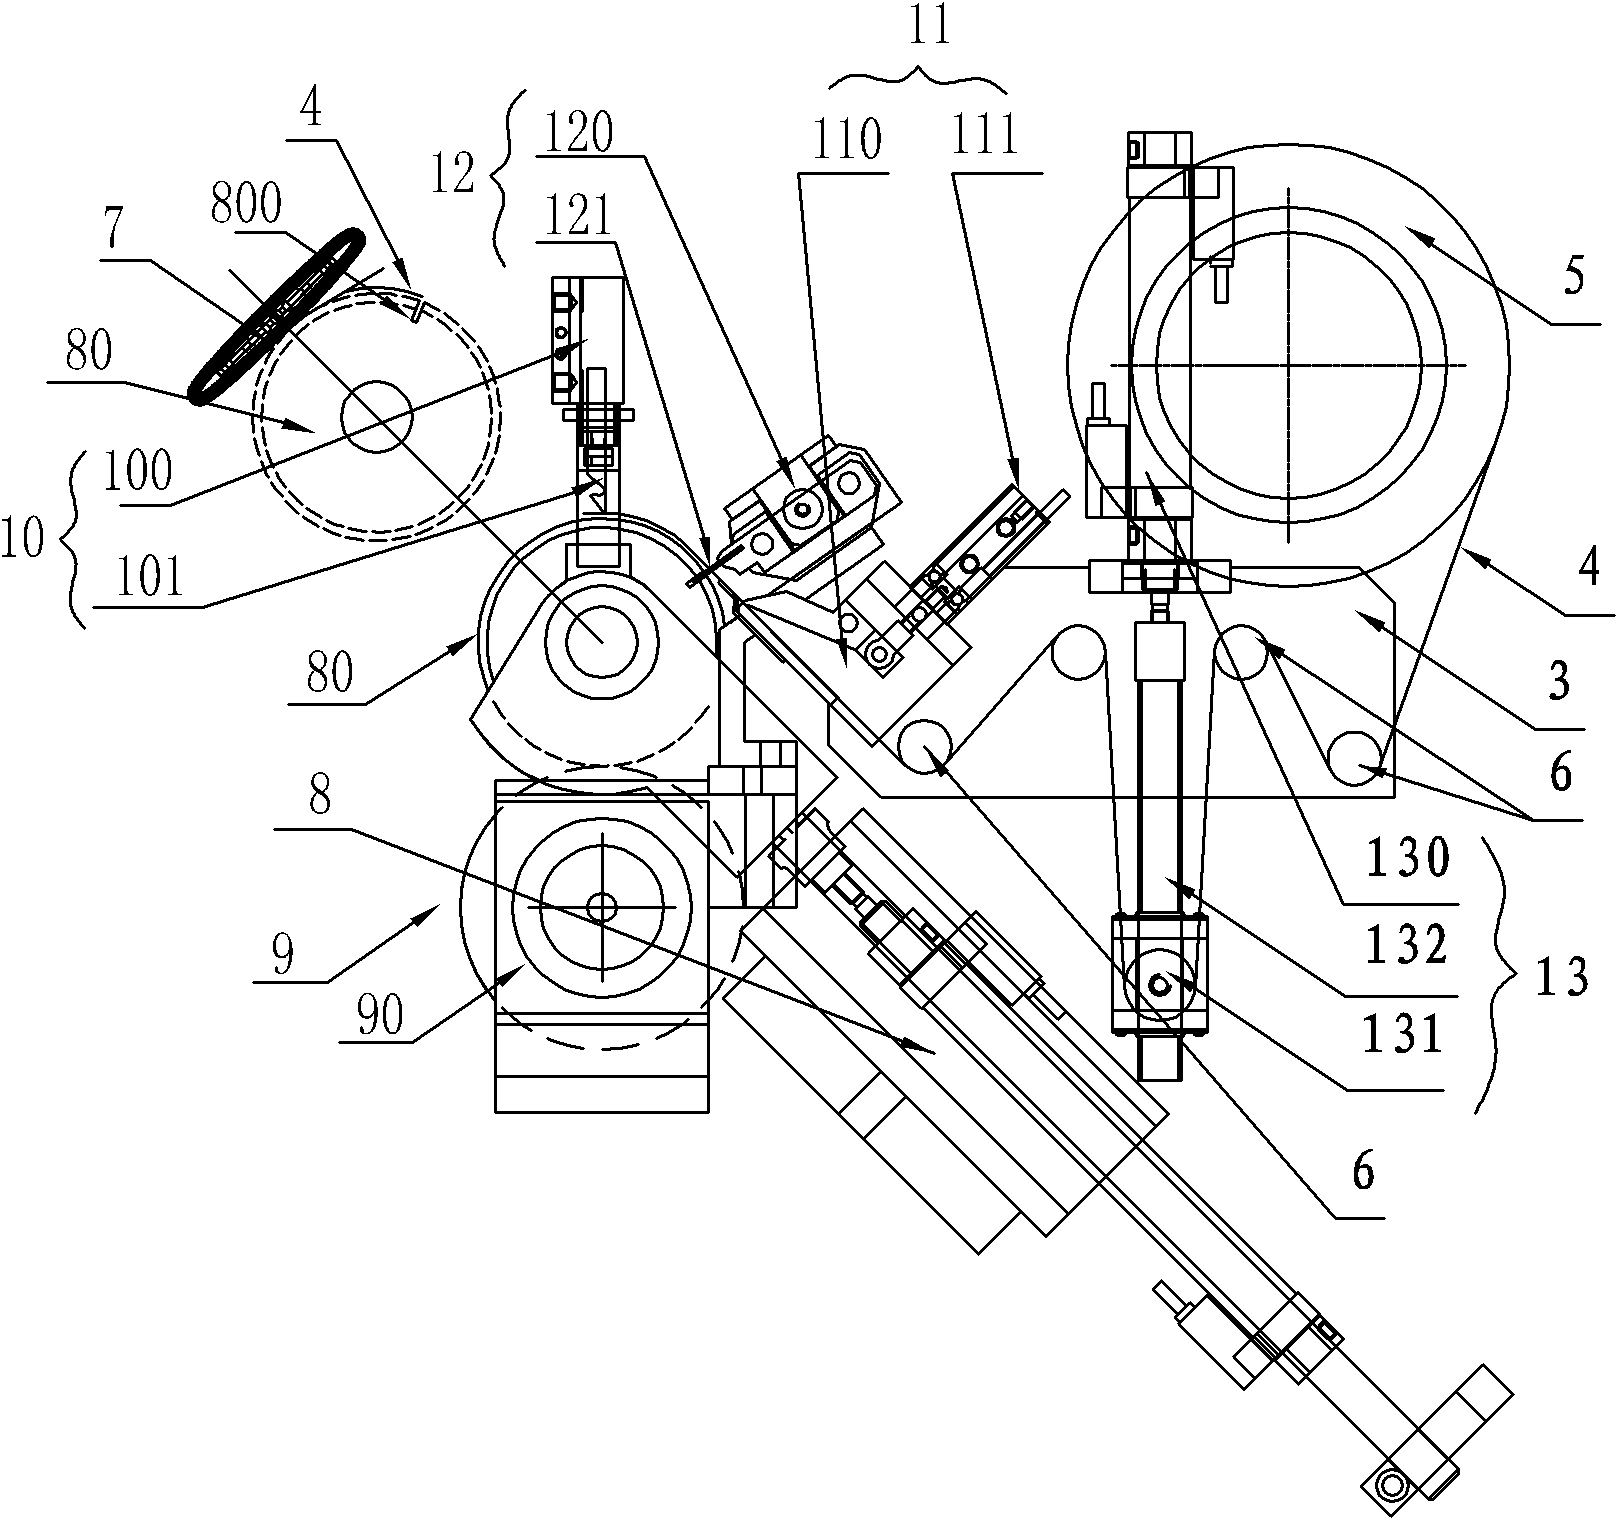 Fully automatic tape pasting mechanism